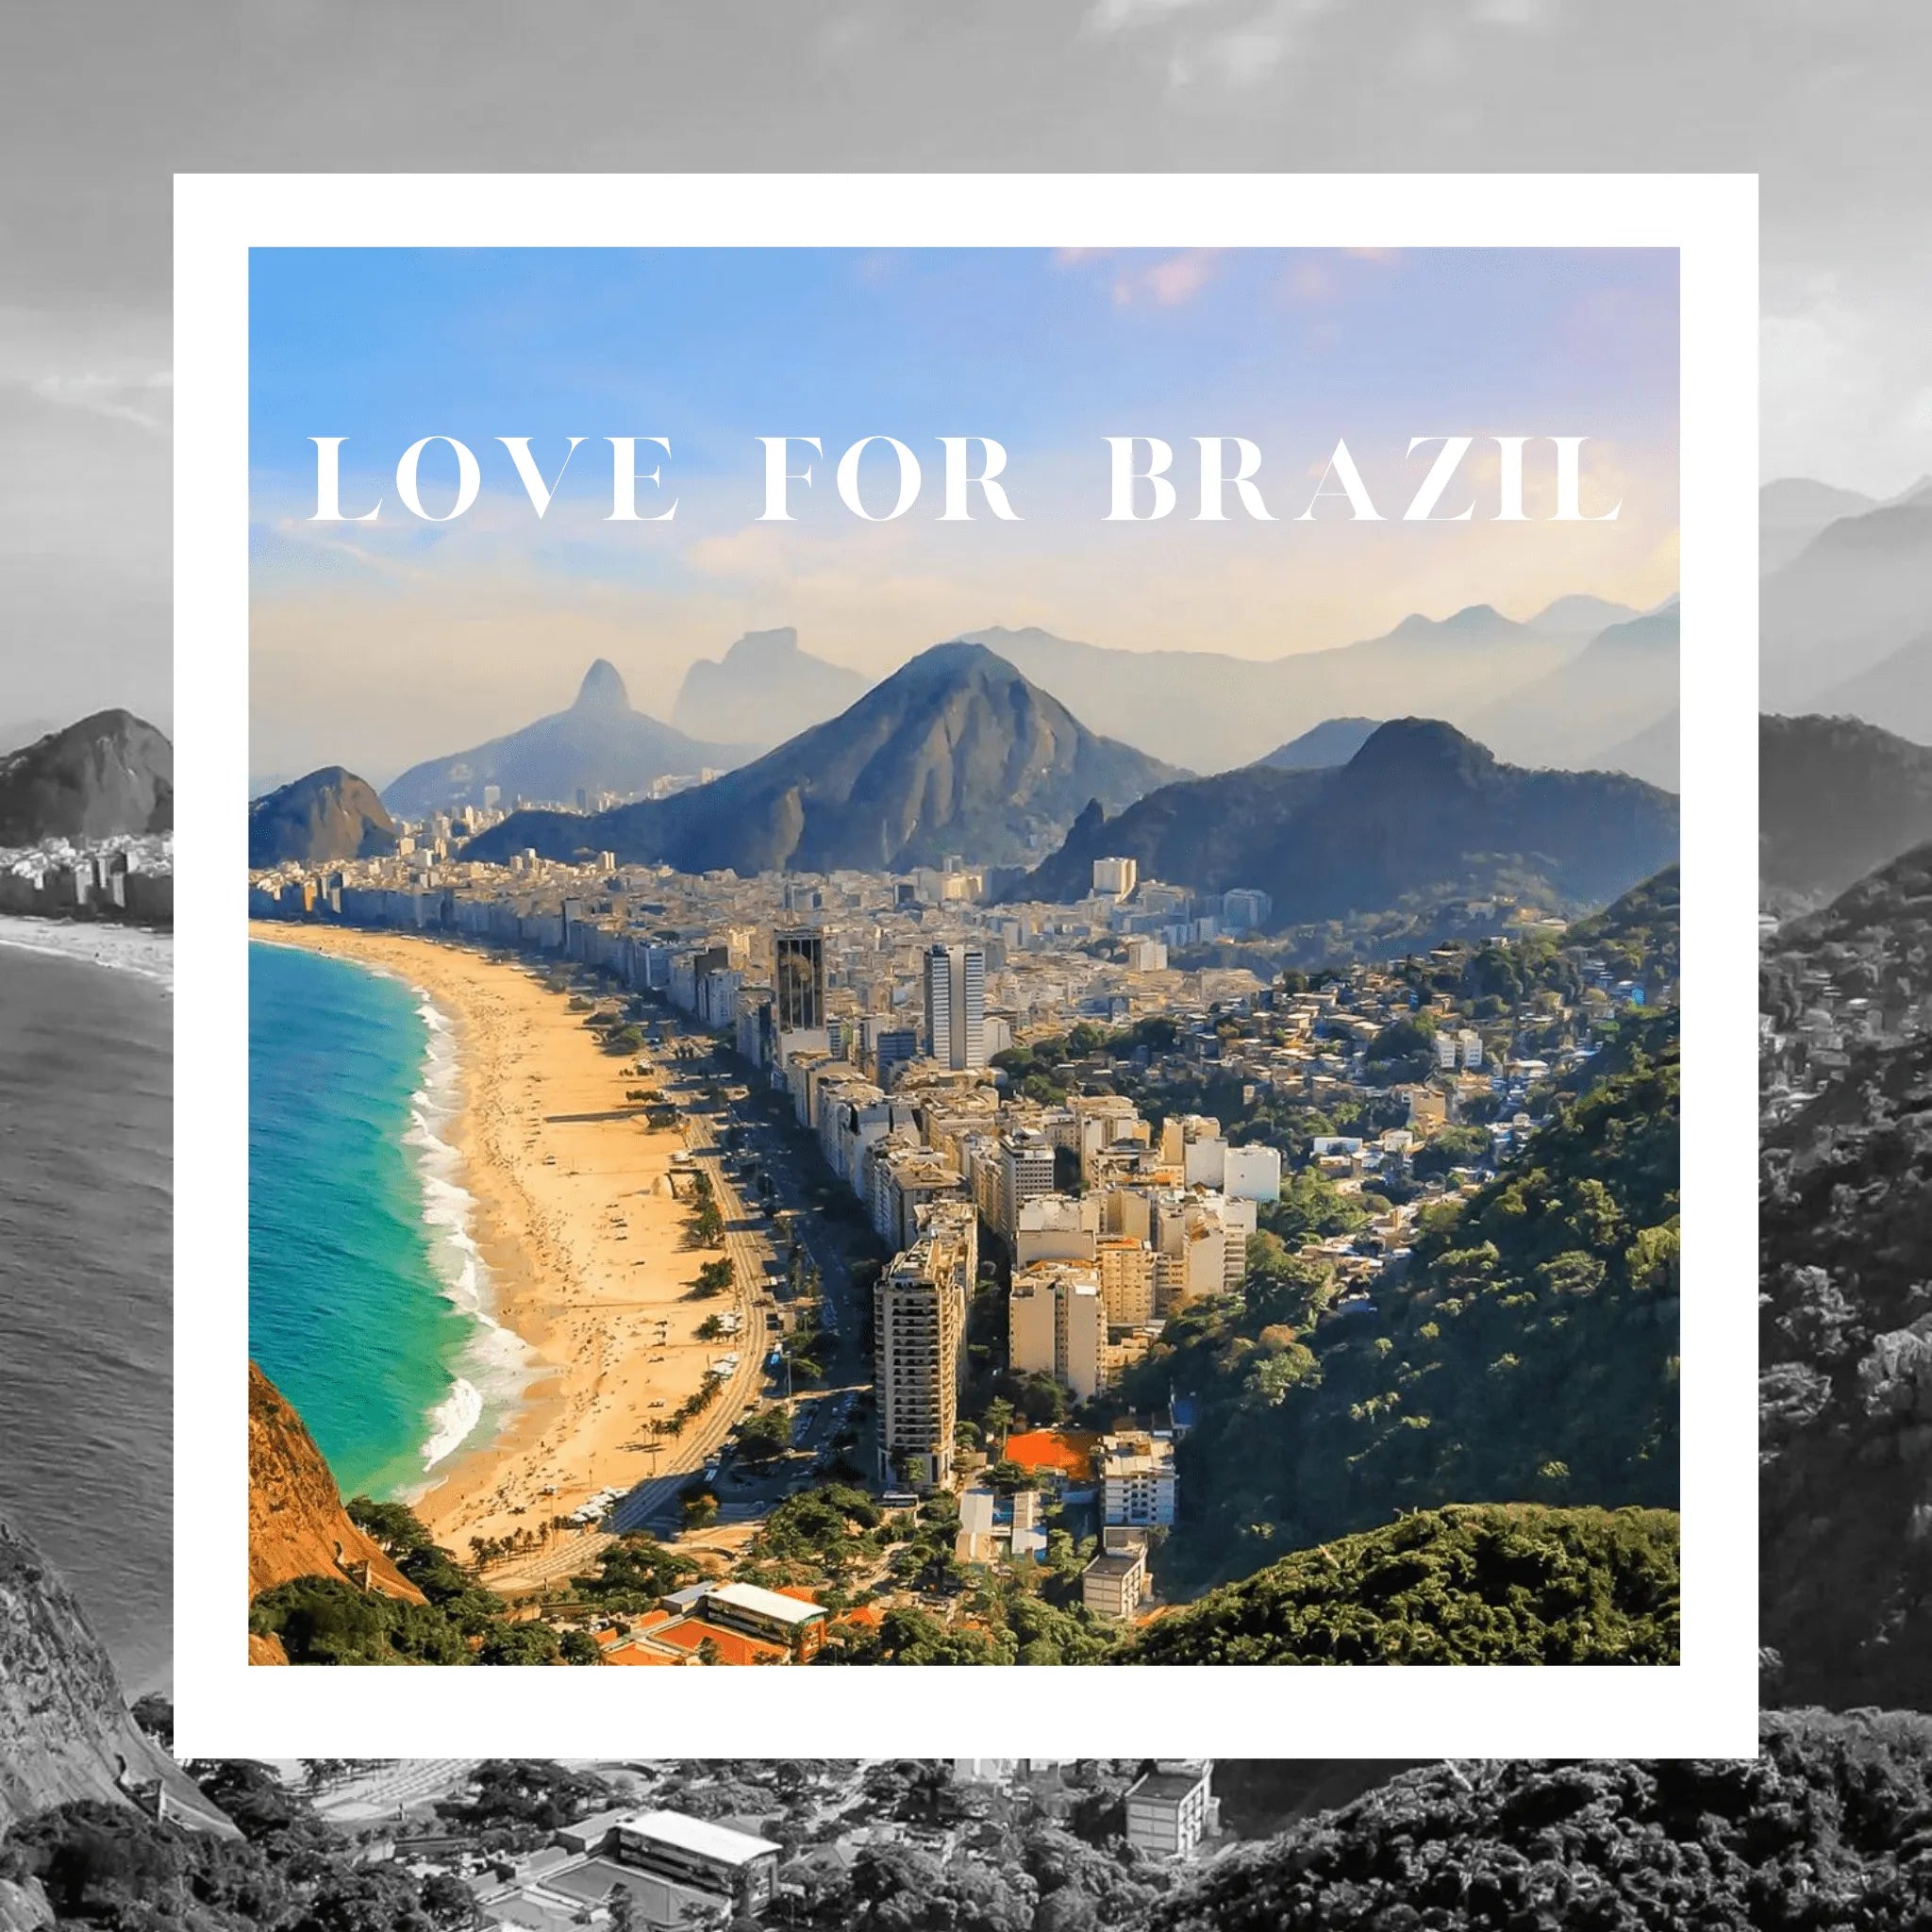 love for brazil: 5 beautiful cities you must visit